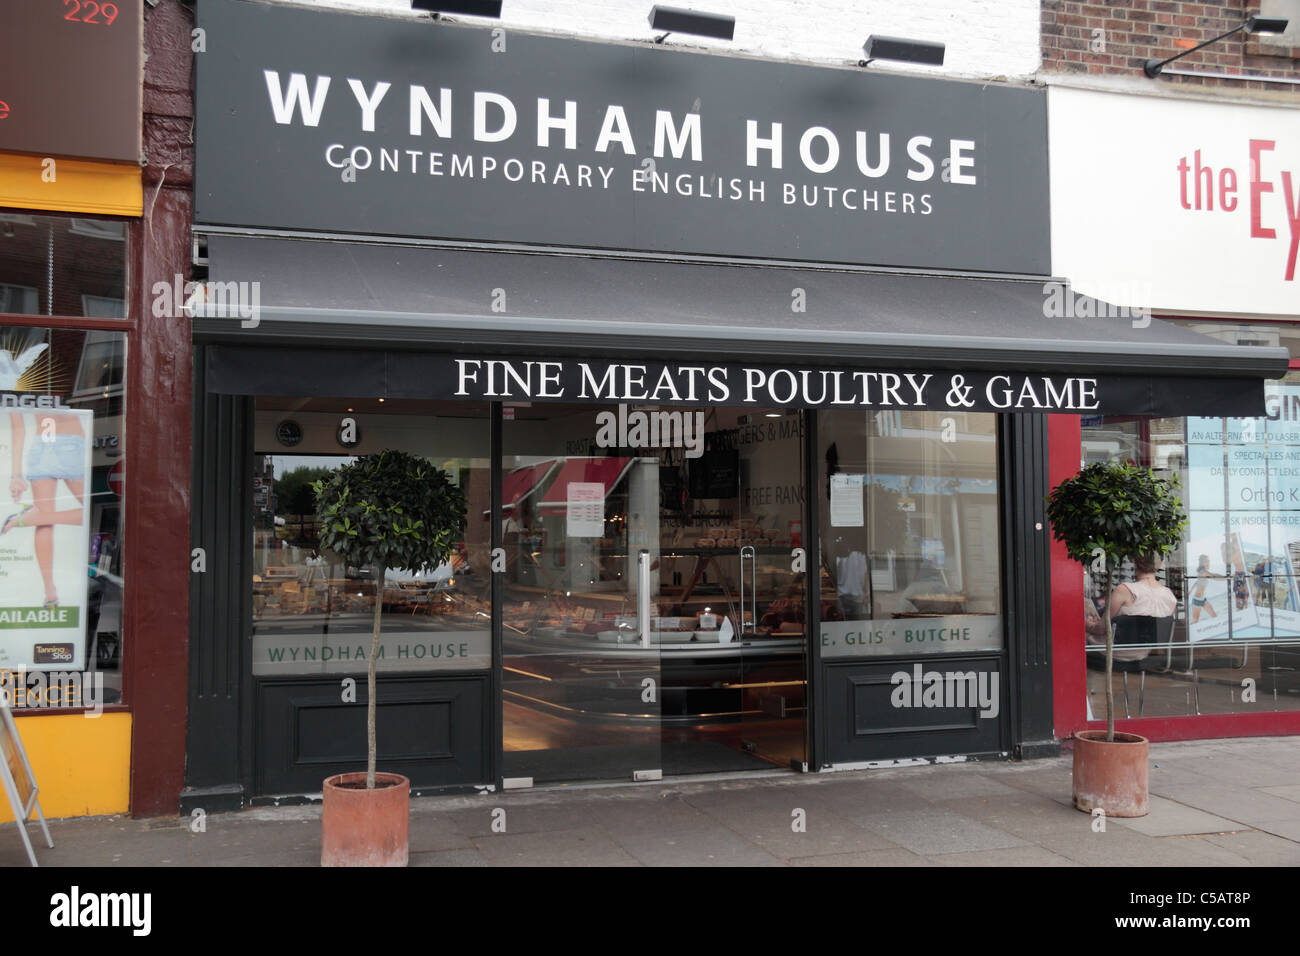 The Wyndham House contemporary English Butchers on Chiswick High Road, West London, England. Stock Photo